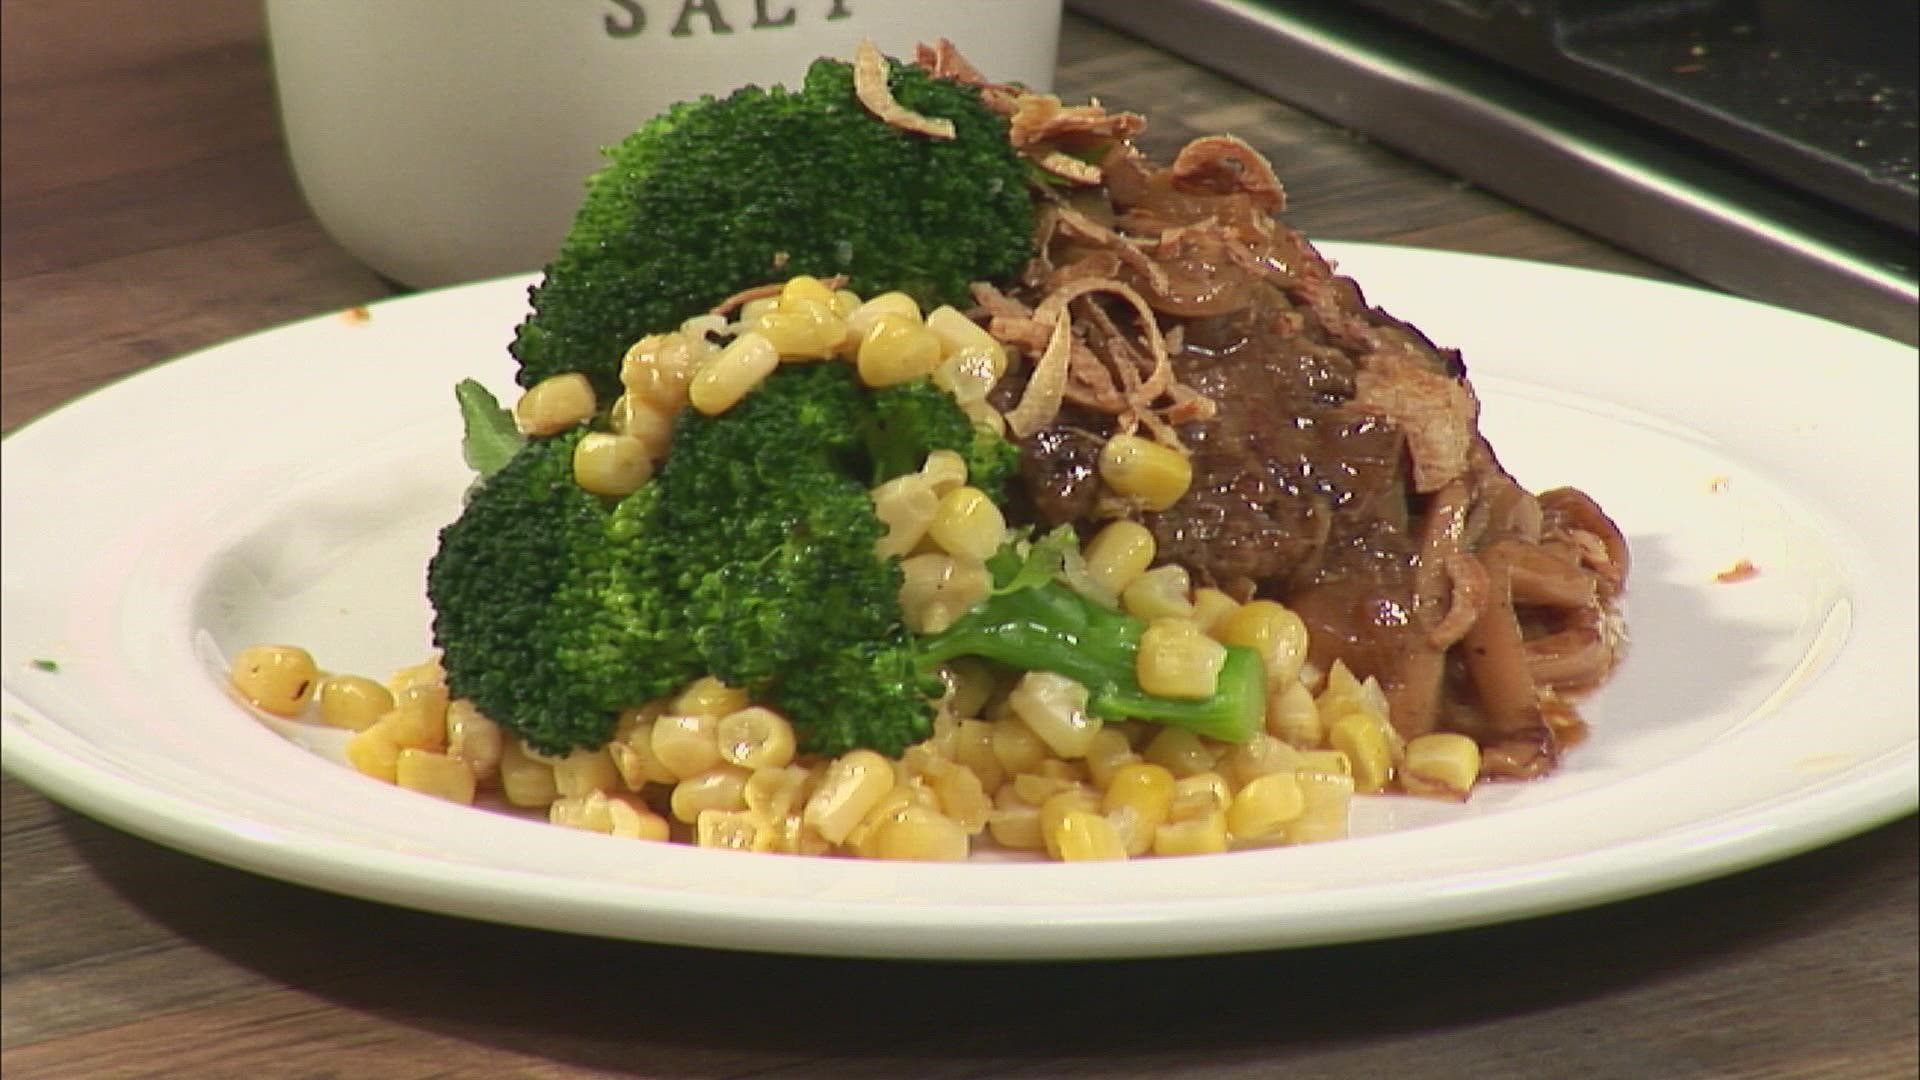 Chef Bo Byrne shows us how to make a Salisbury steak with mashed potatoes.